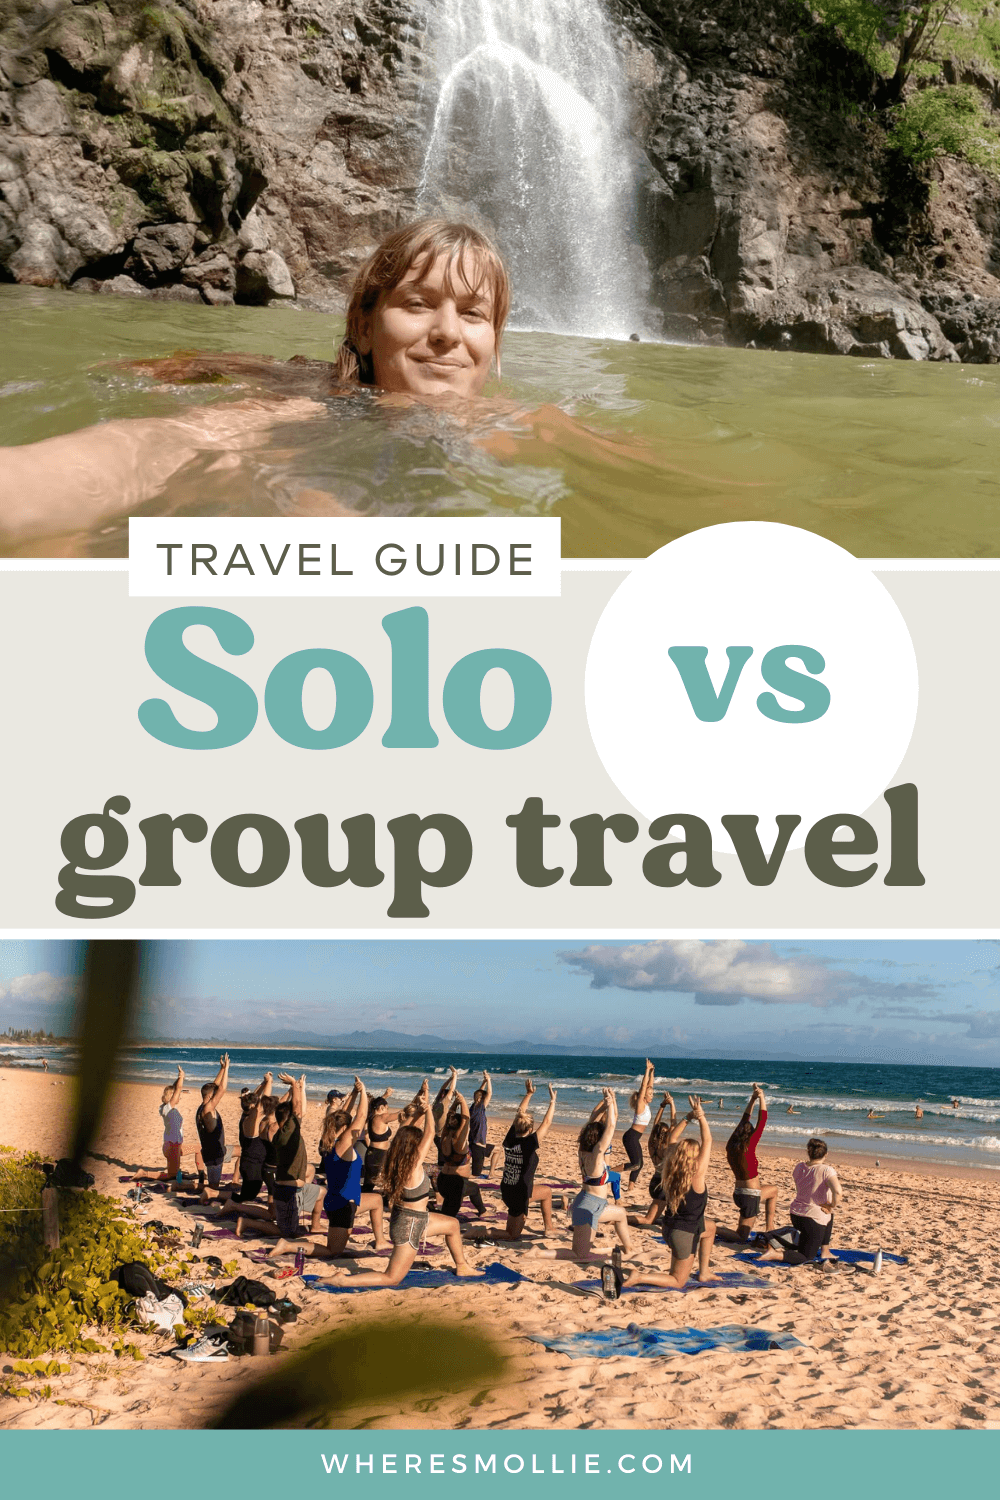 Solo travel vs group travel - which should you do?